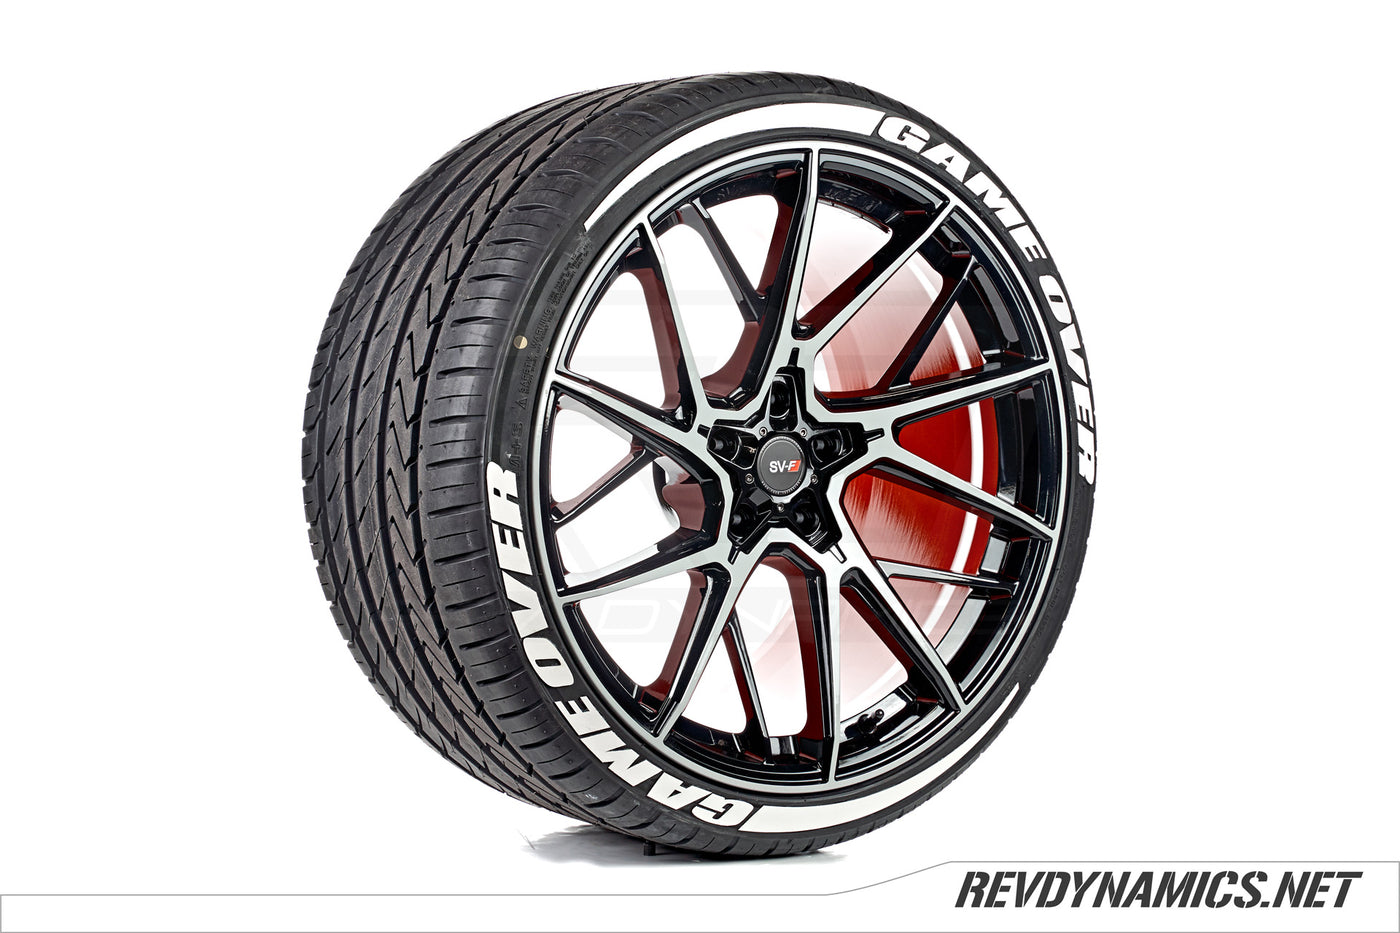 Savini SV-F6 with Lexani LX-Twenty with Tire Lettering tire custom painted in Ghost Grey, Indy Red, and Black 